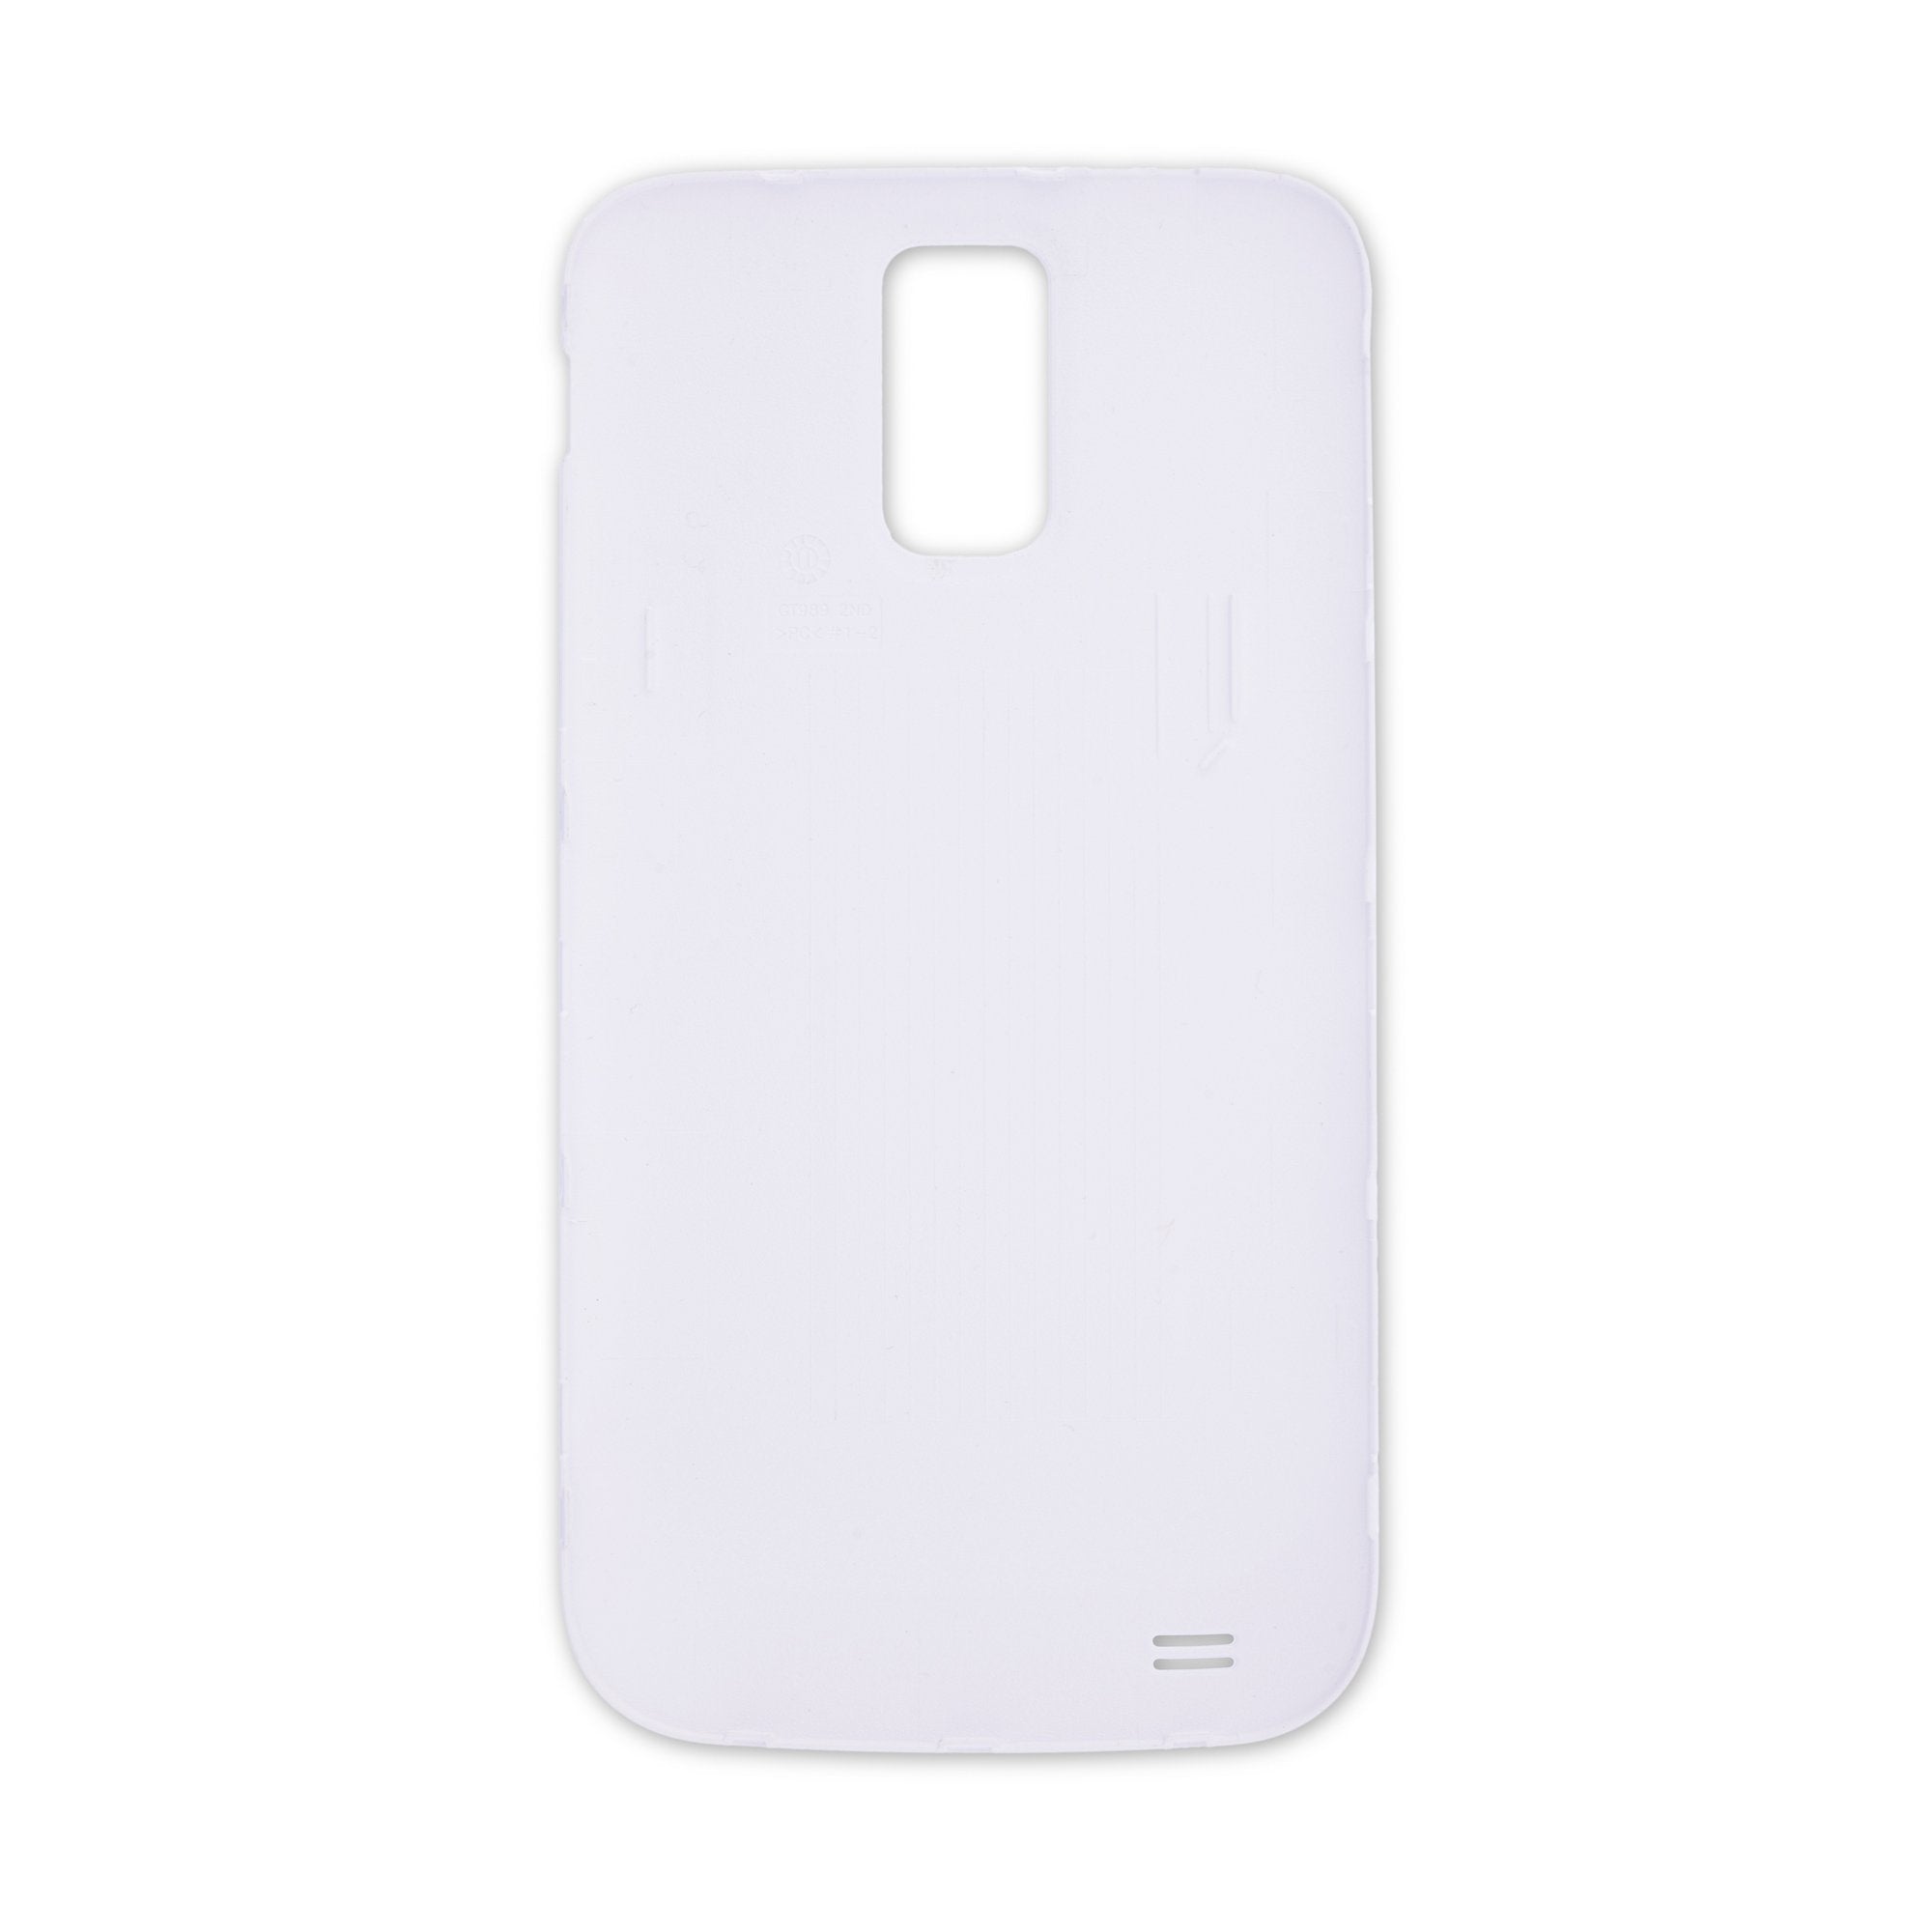 Galaxy S II Battery Cover (T-Mobile) White New GH98-21061B